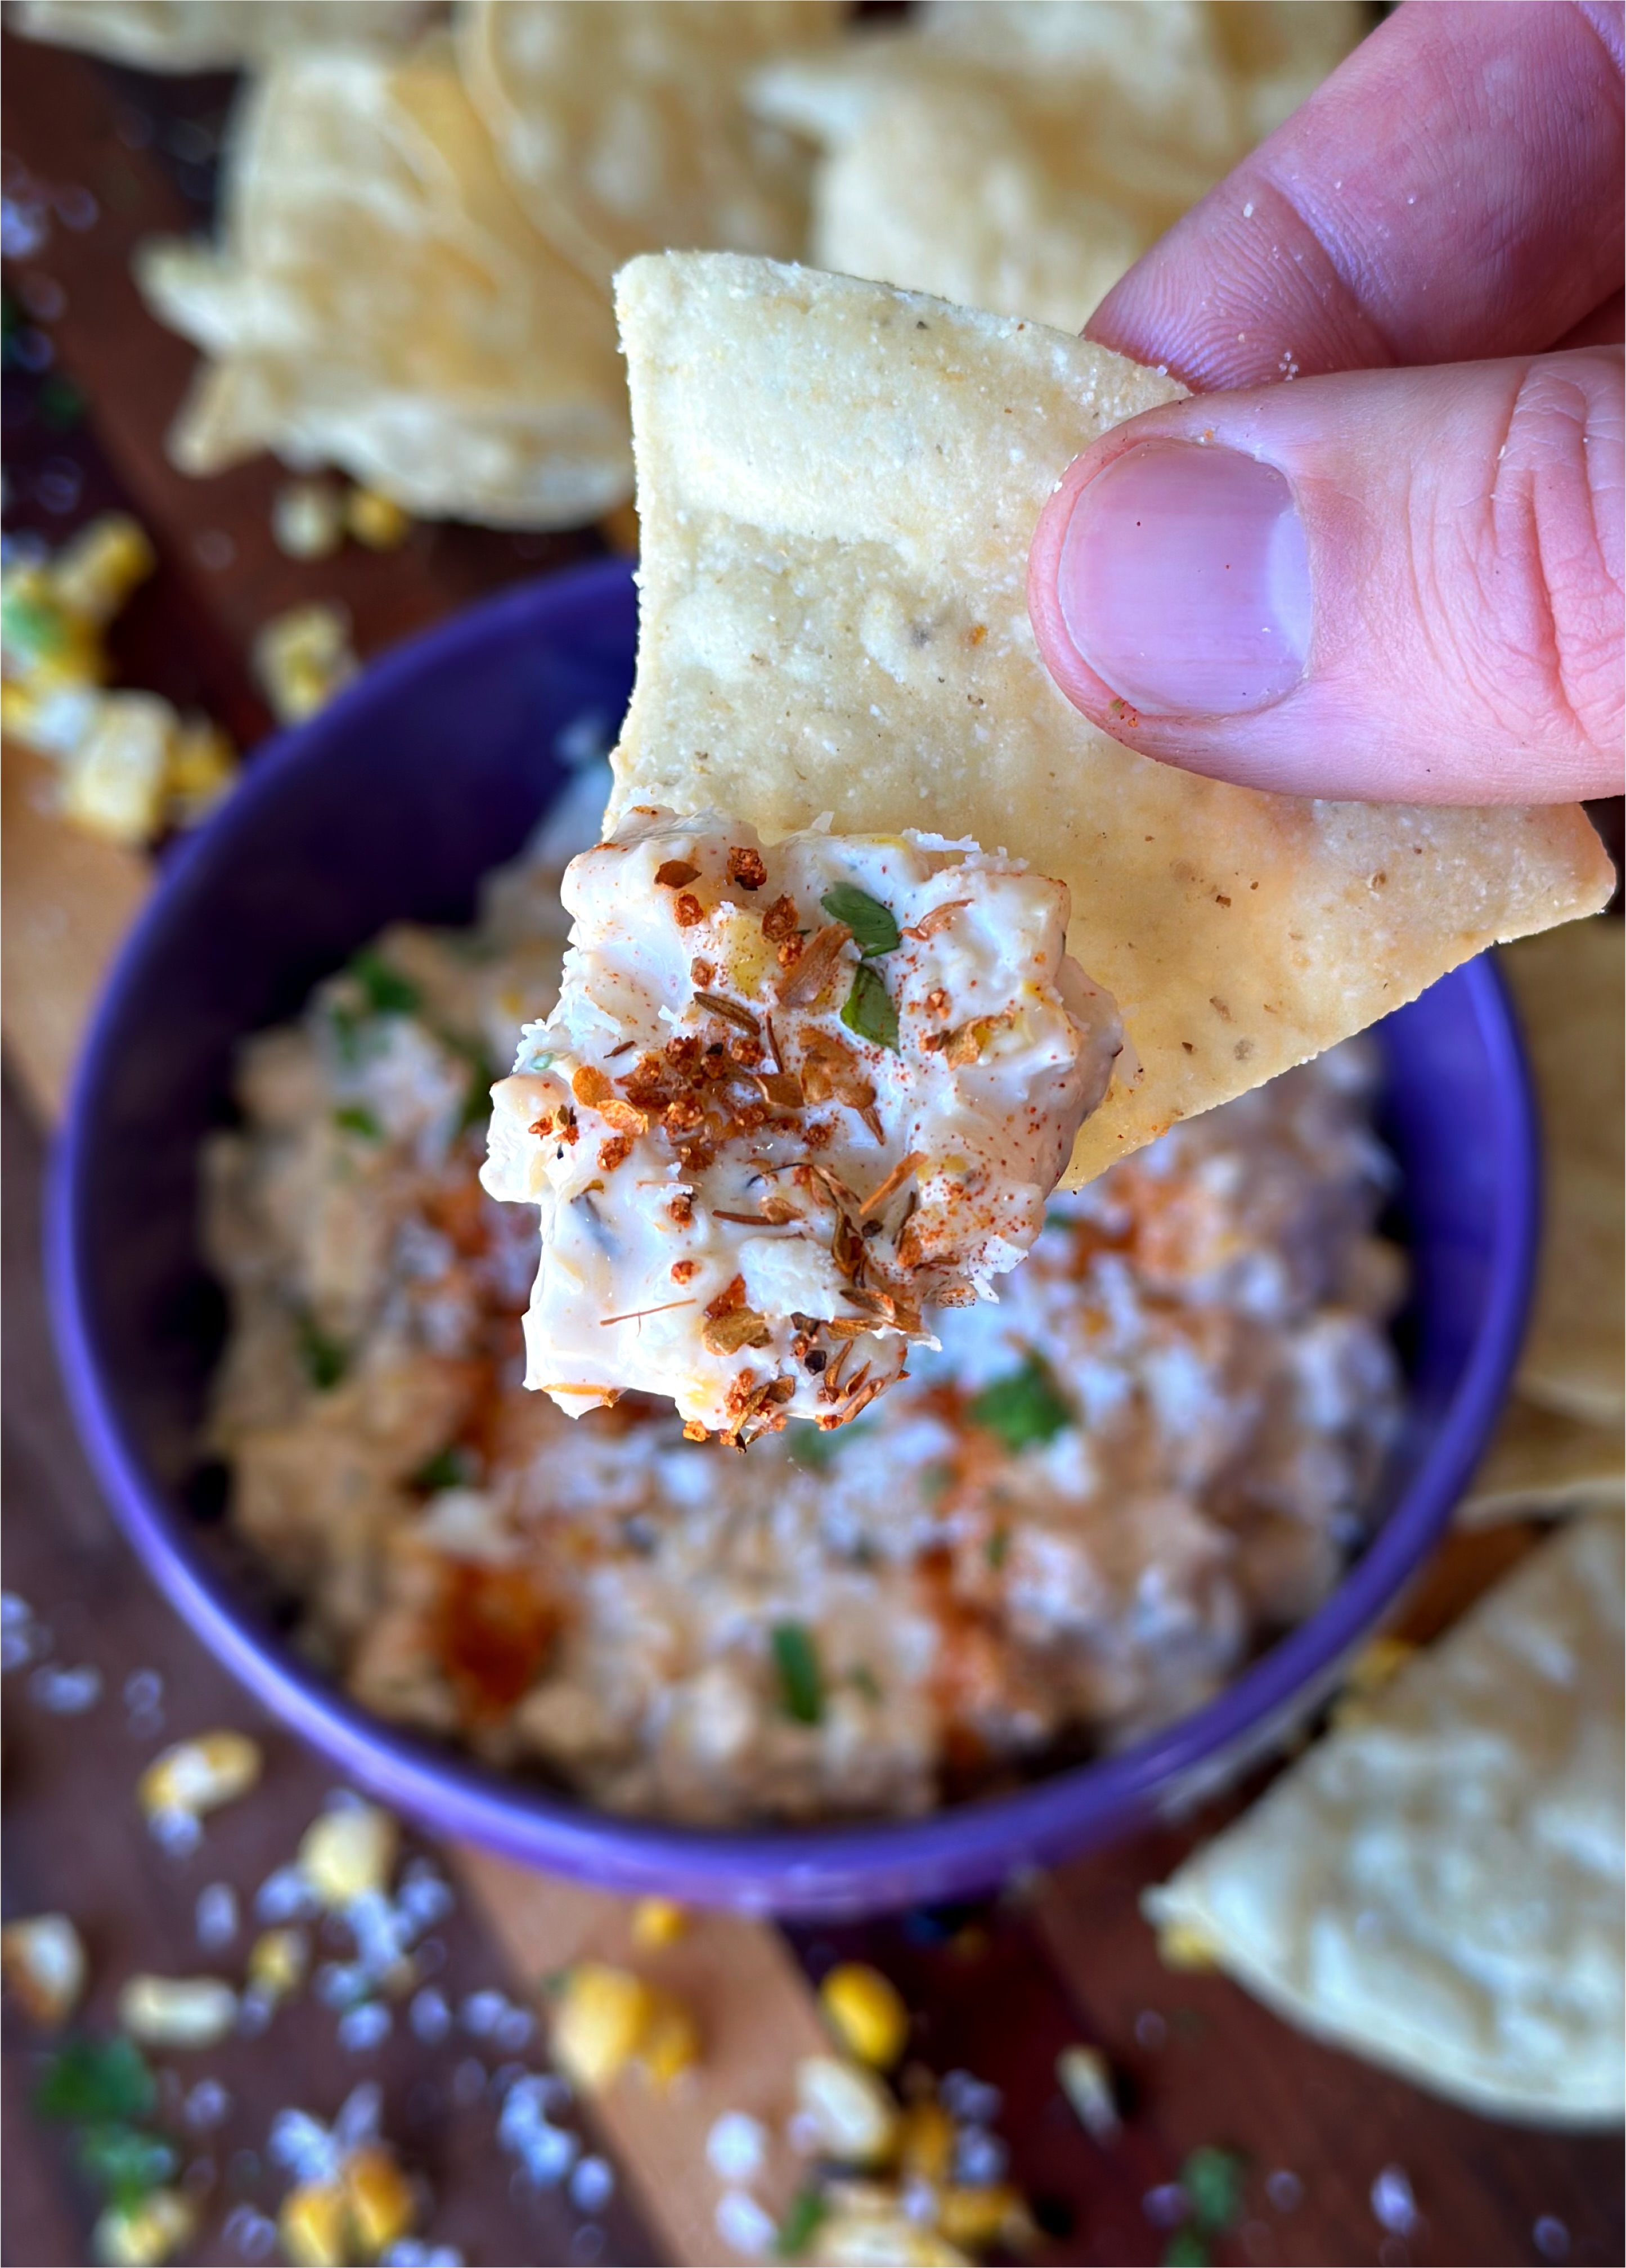 Tortilla chips are perfect for this easy homemade dip! 